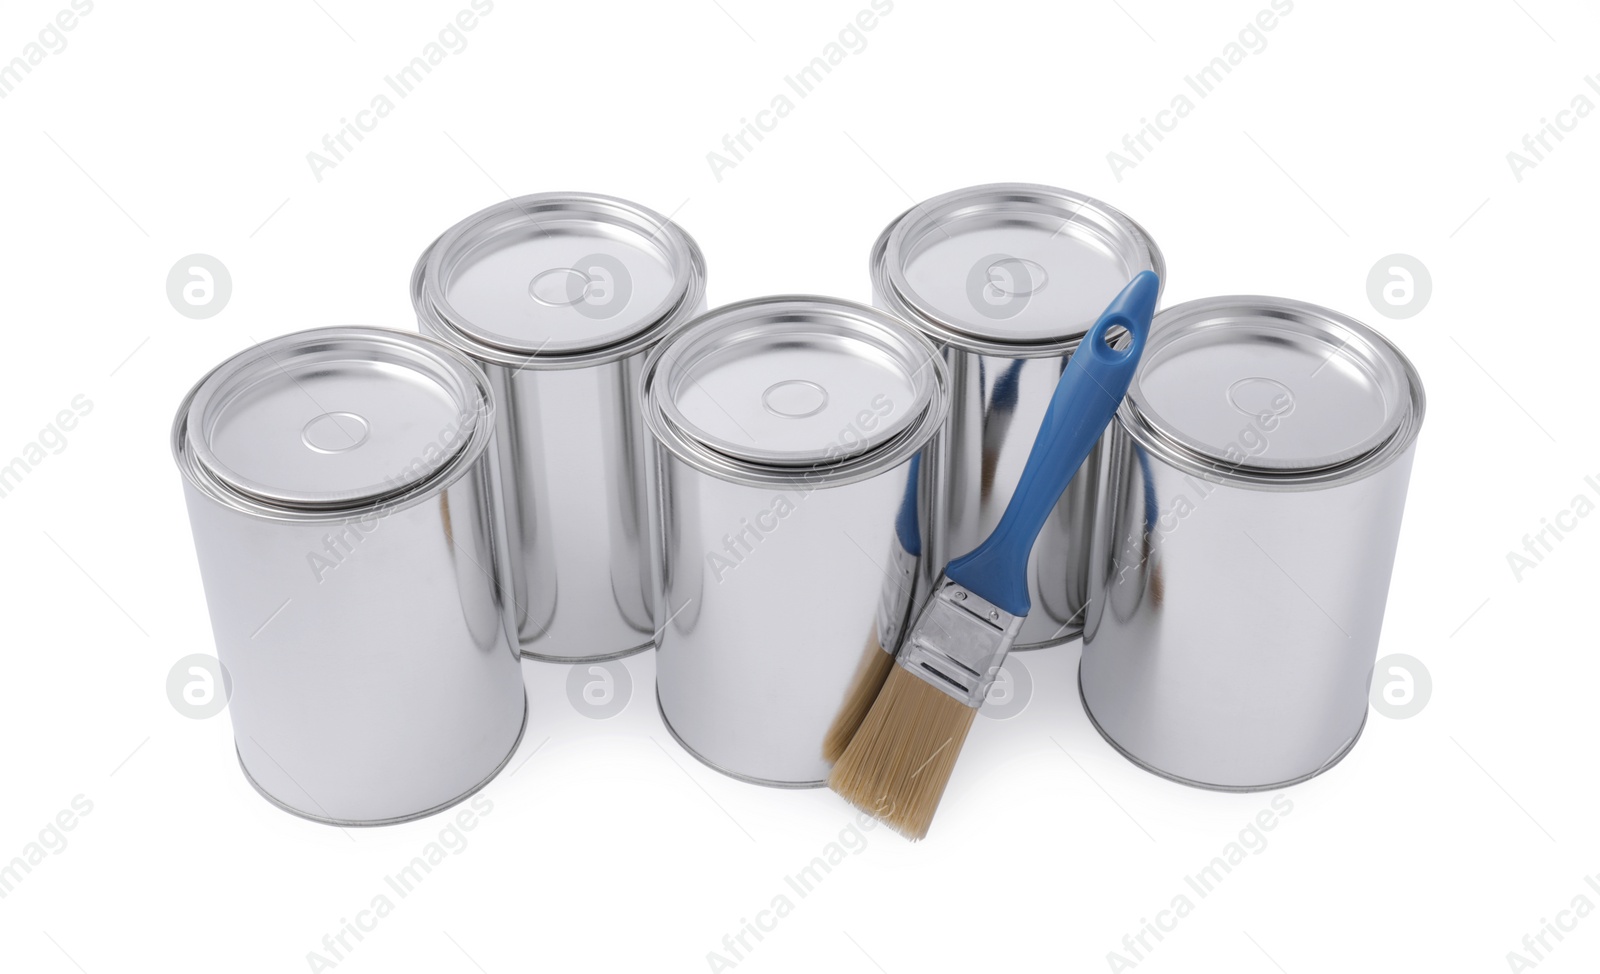 Photo of Cans of paints and brush on white background